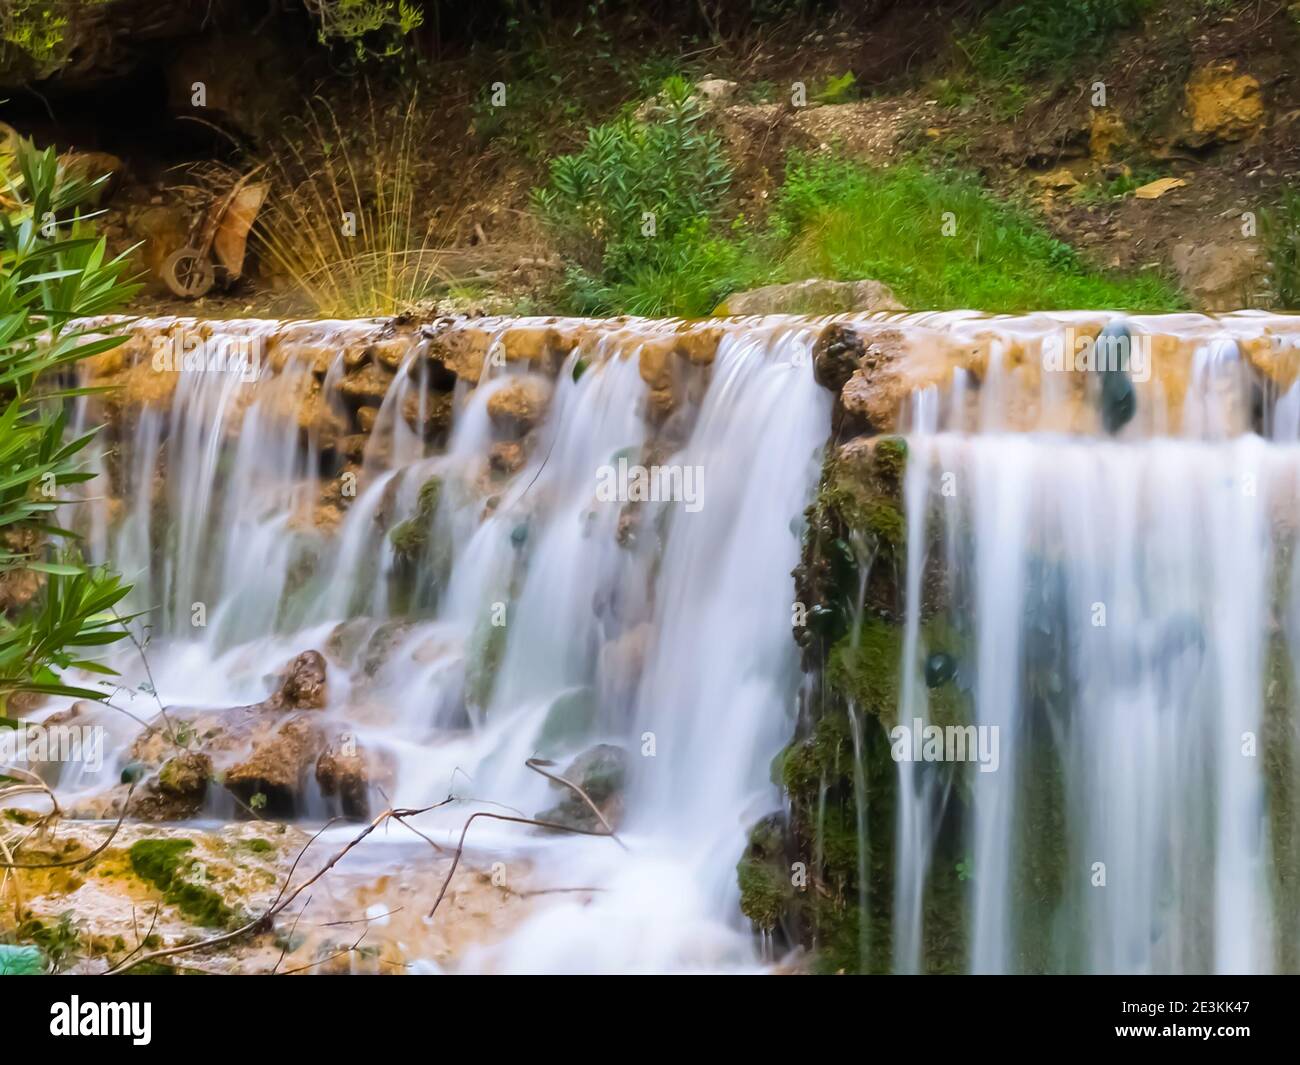 Flowing waterfall in Akchour, Chefchaouen, Morocco Stock Photo